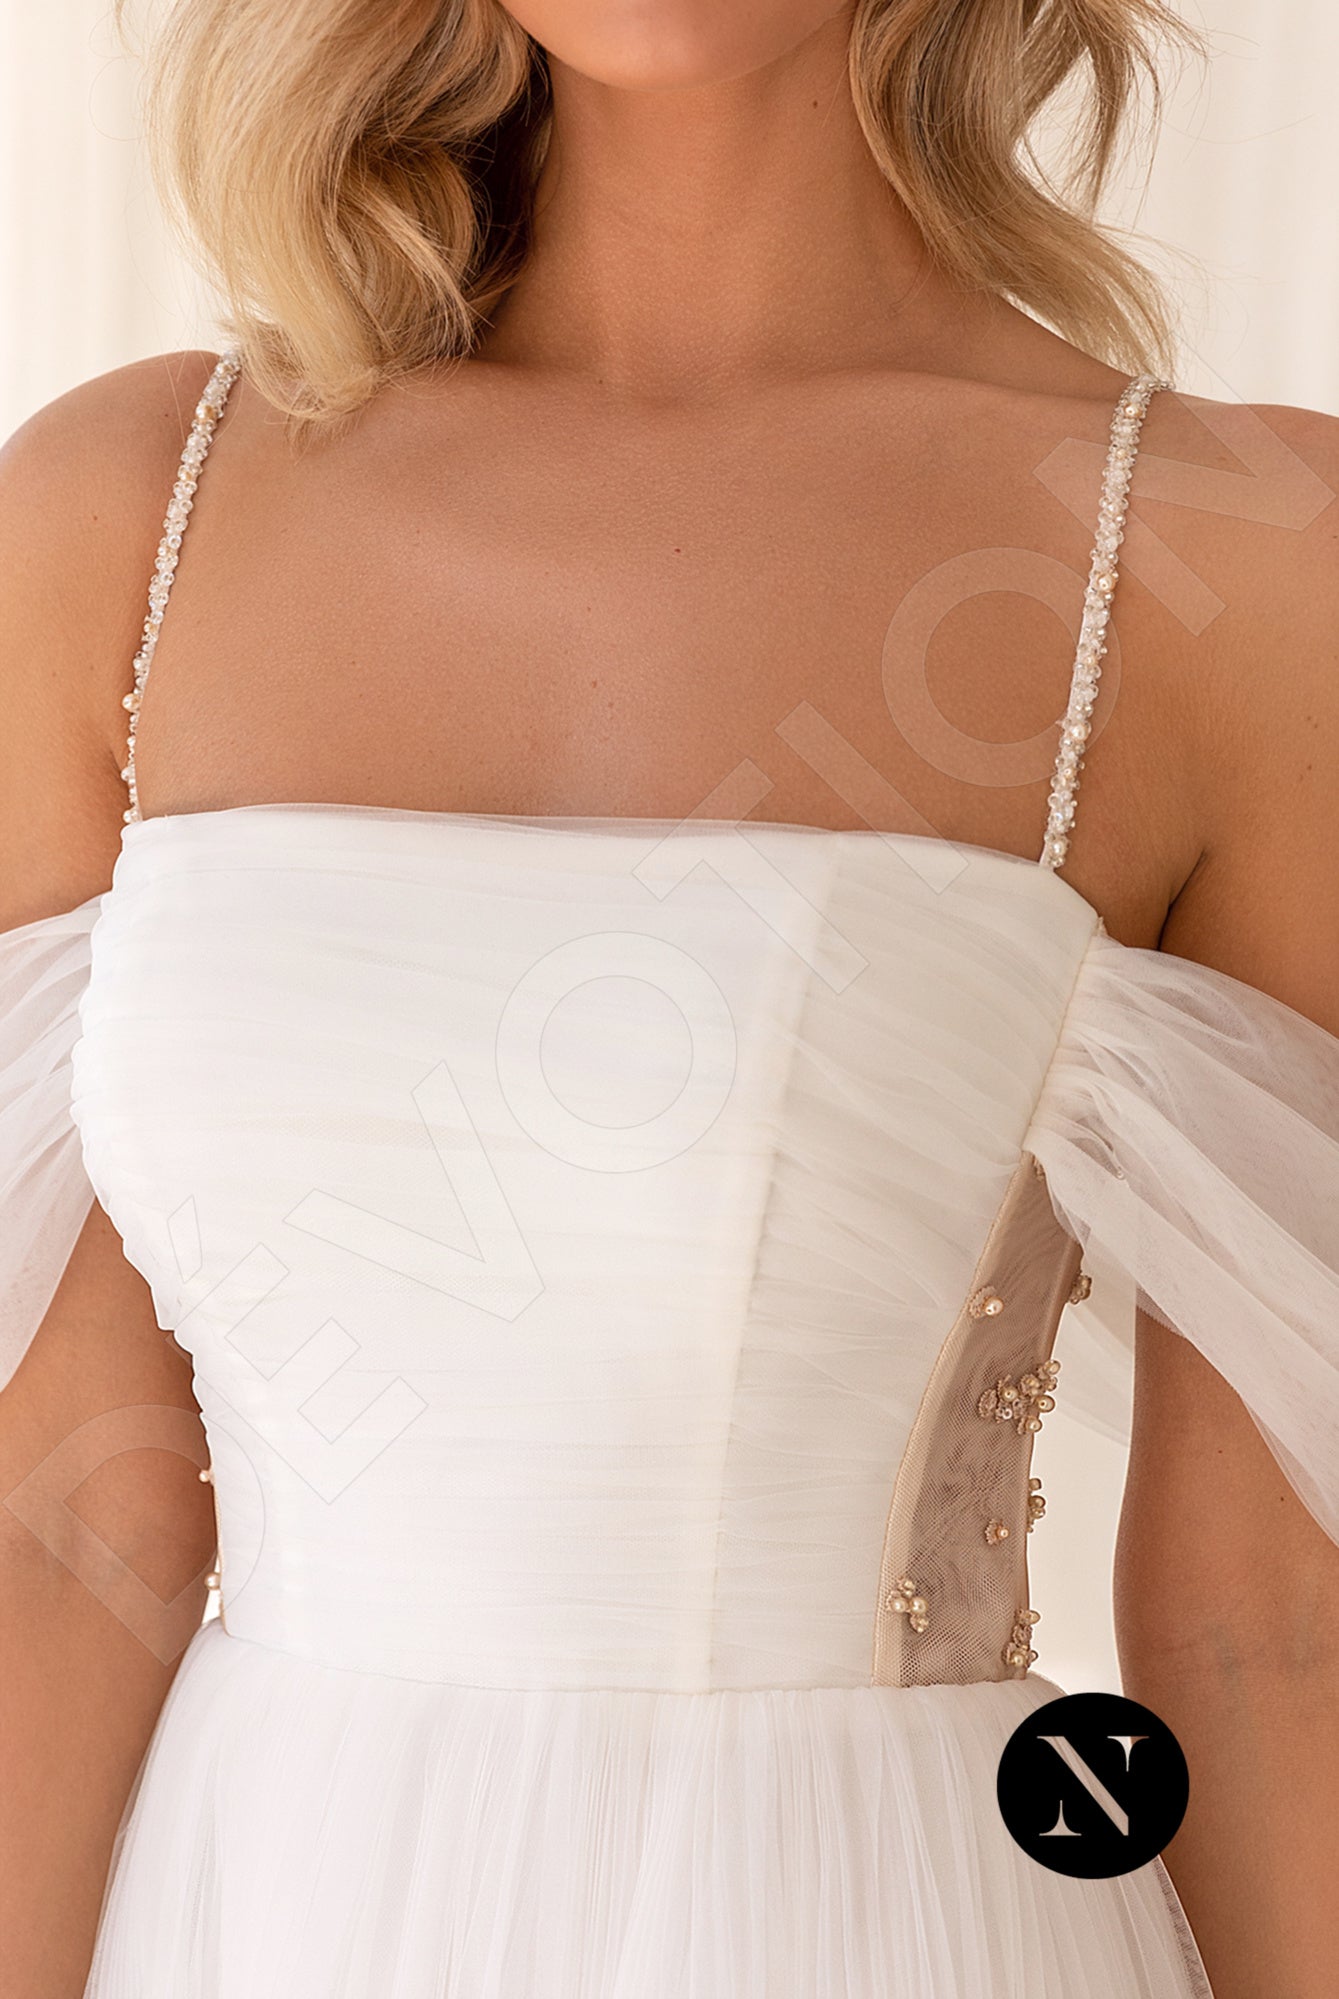 Ines Open back A-line Straps Wedding Dress 7